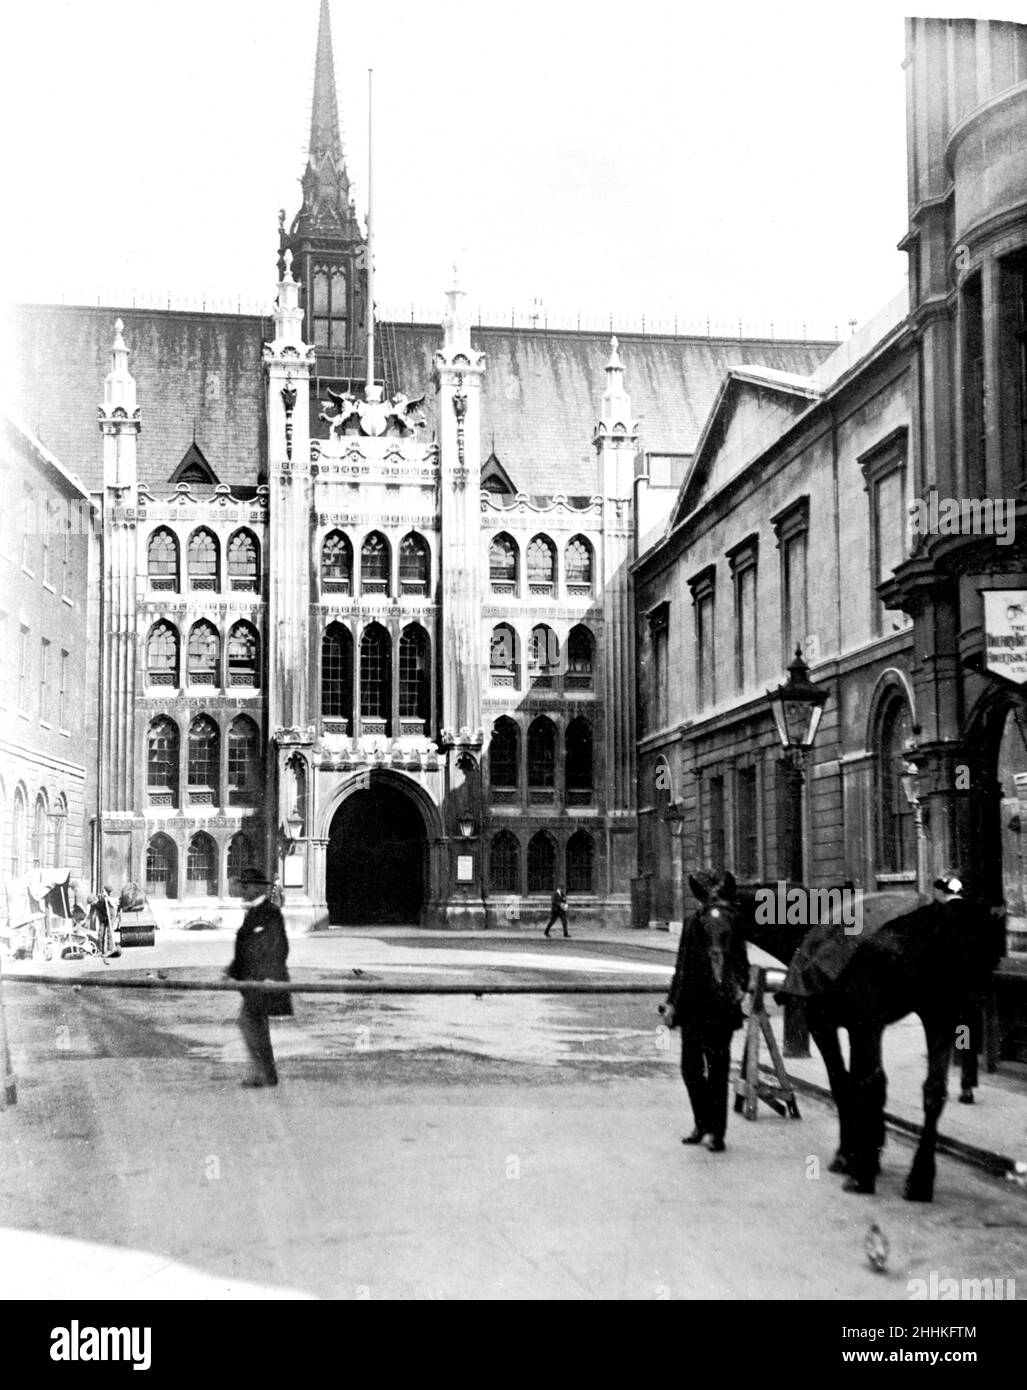 The Guildhall in the City of London seen here in the late 1930s before it was damaged in the Second Great Fire of London (December 1940) The building is several hundred years old, and is still the ceremonial and administrative centre of the City of London Stock Photo